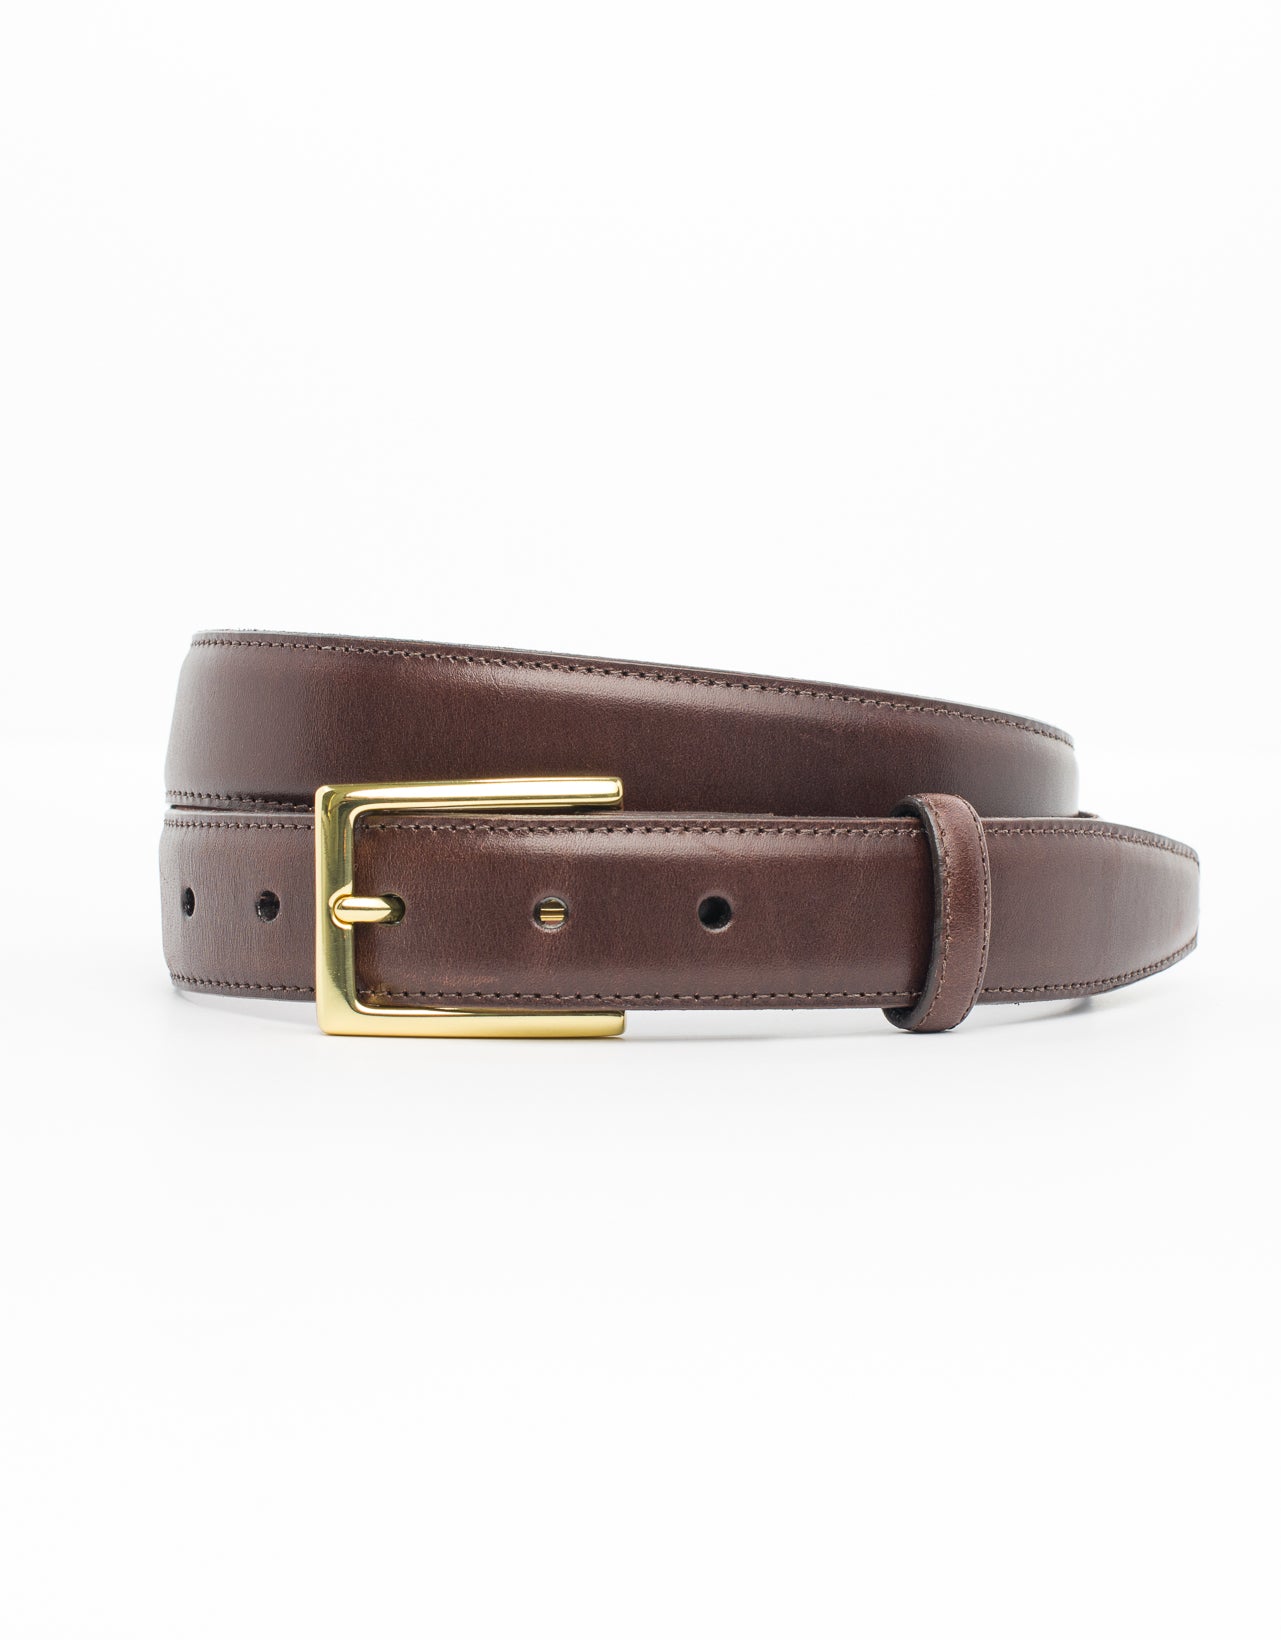 BROWN WITH GOLD ITALIAN LEATHER BELT